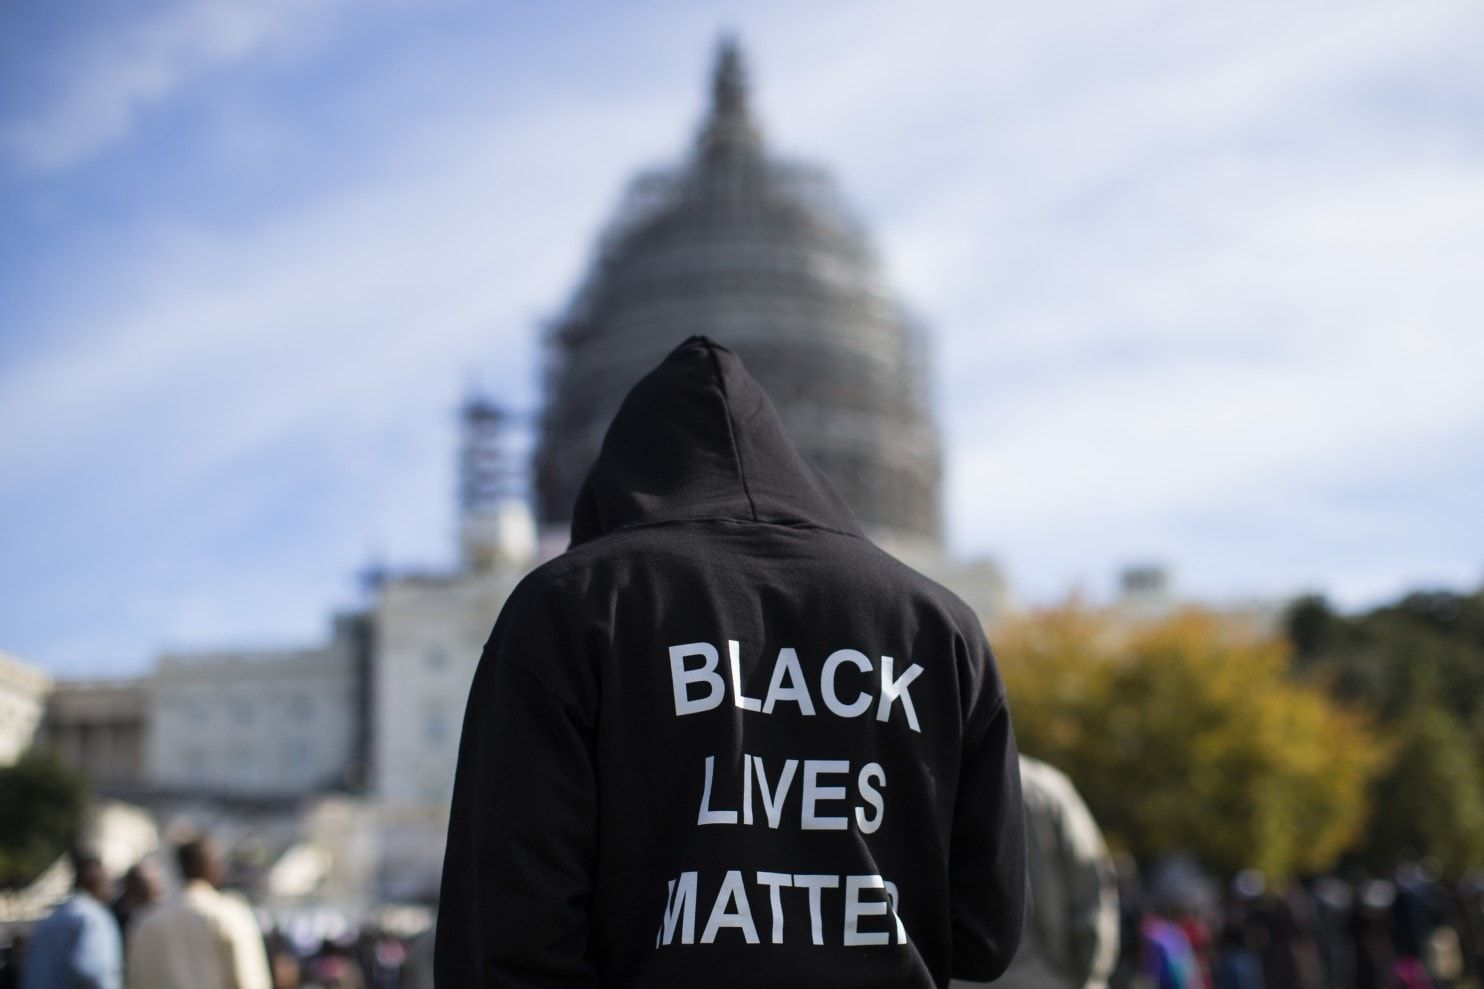 Turning away from street protests, Black Lives Matter tries a new tactic in the age of Trump Washington Post